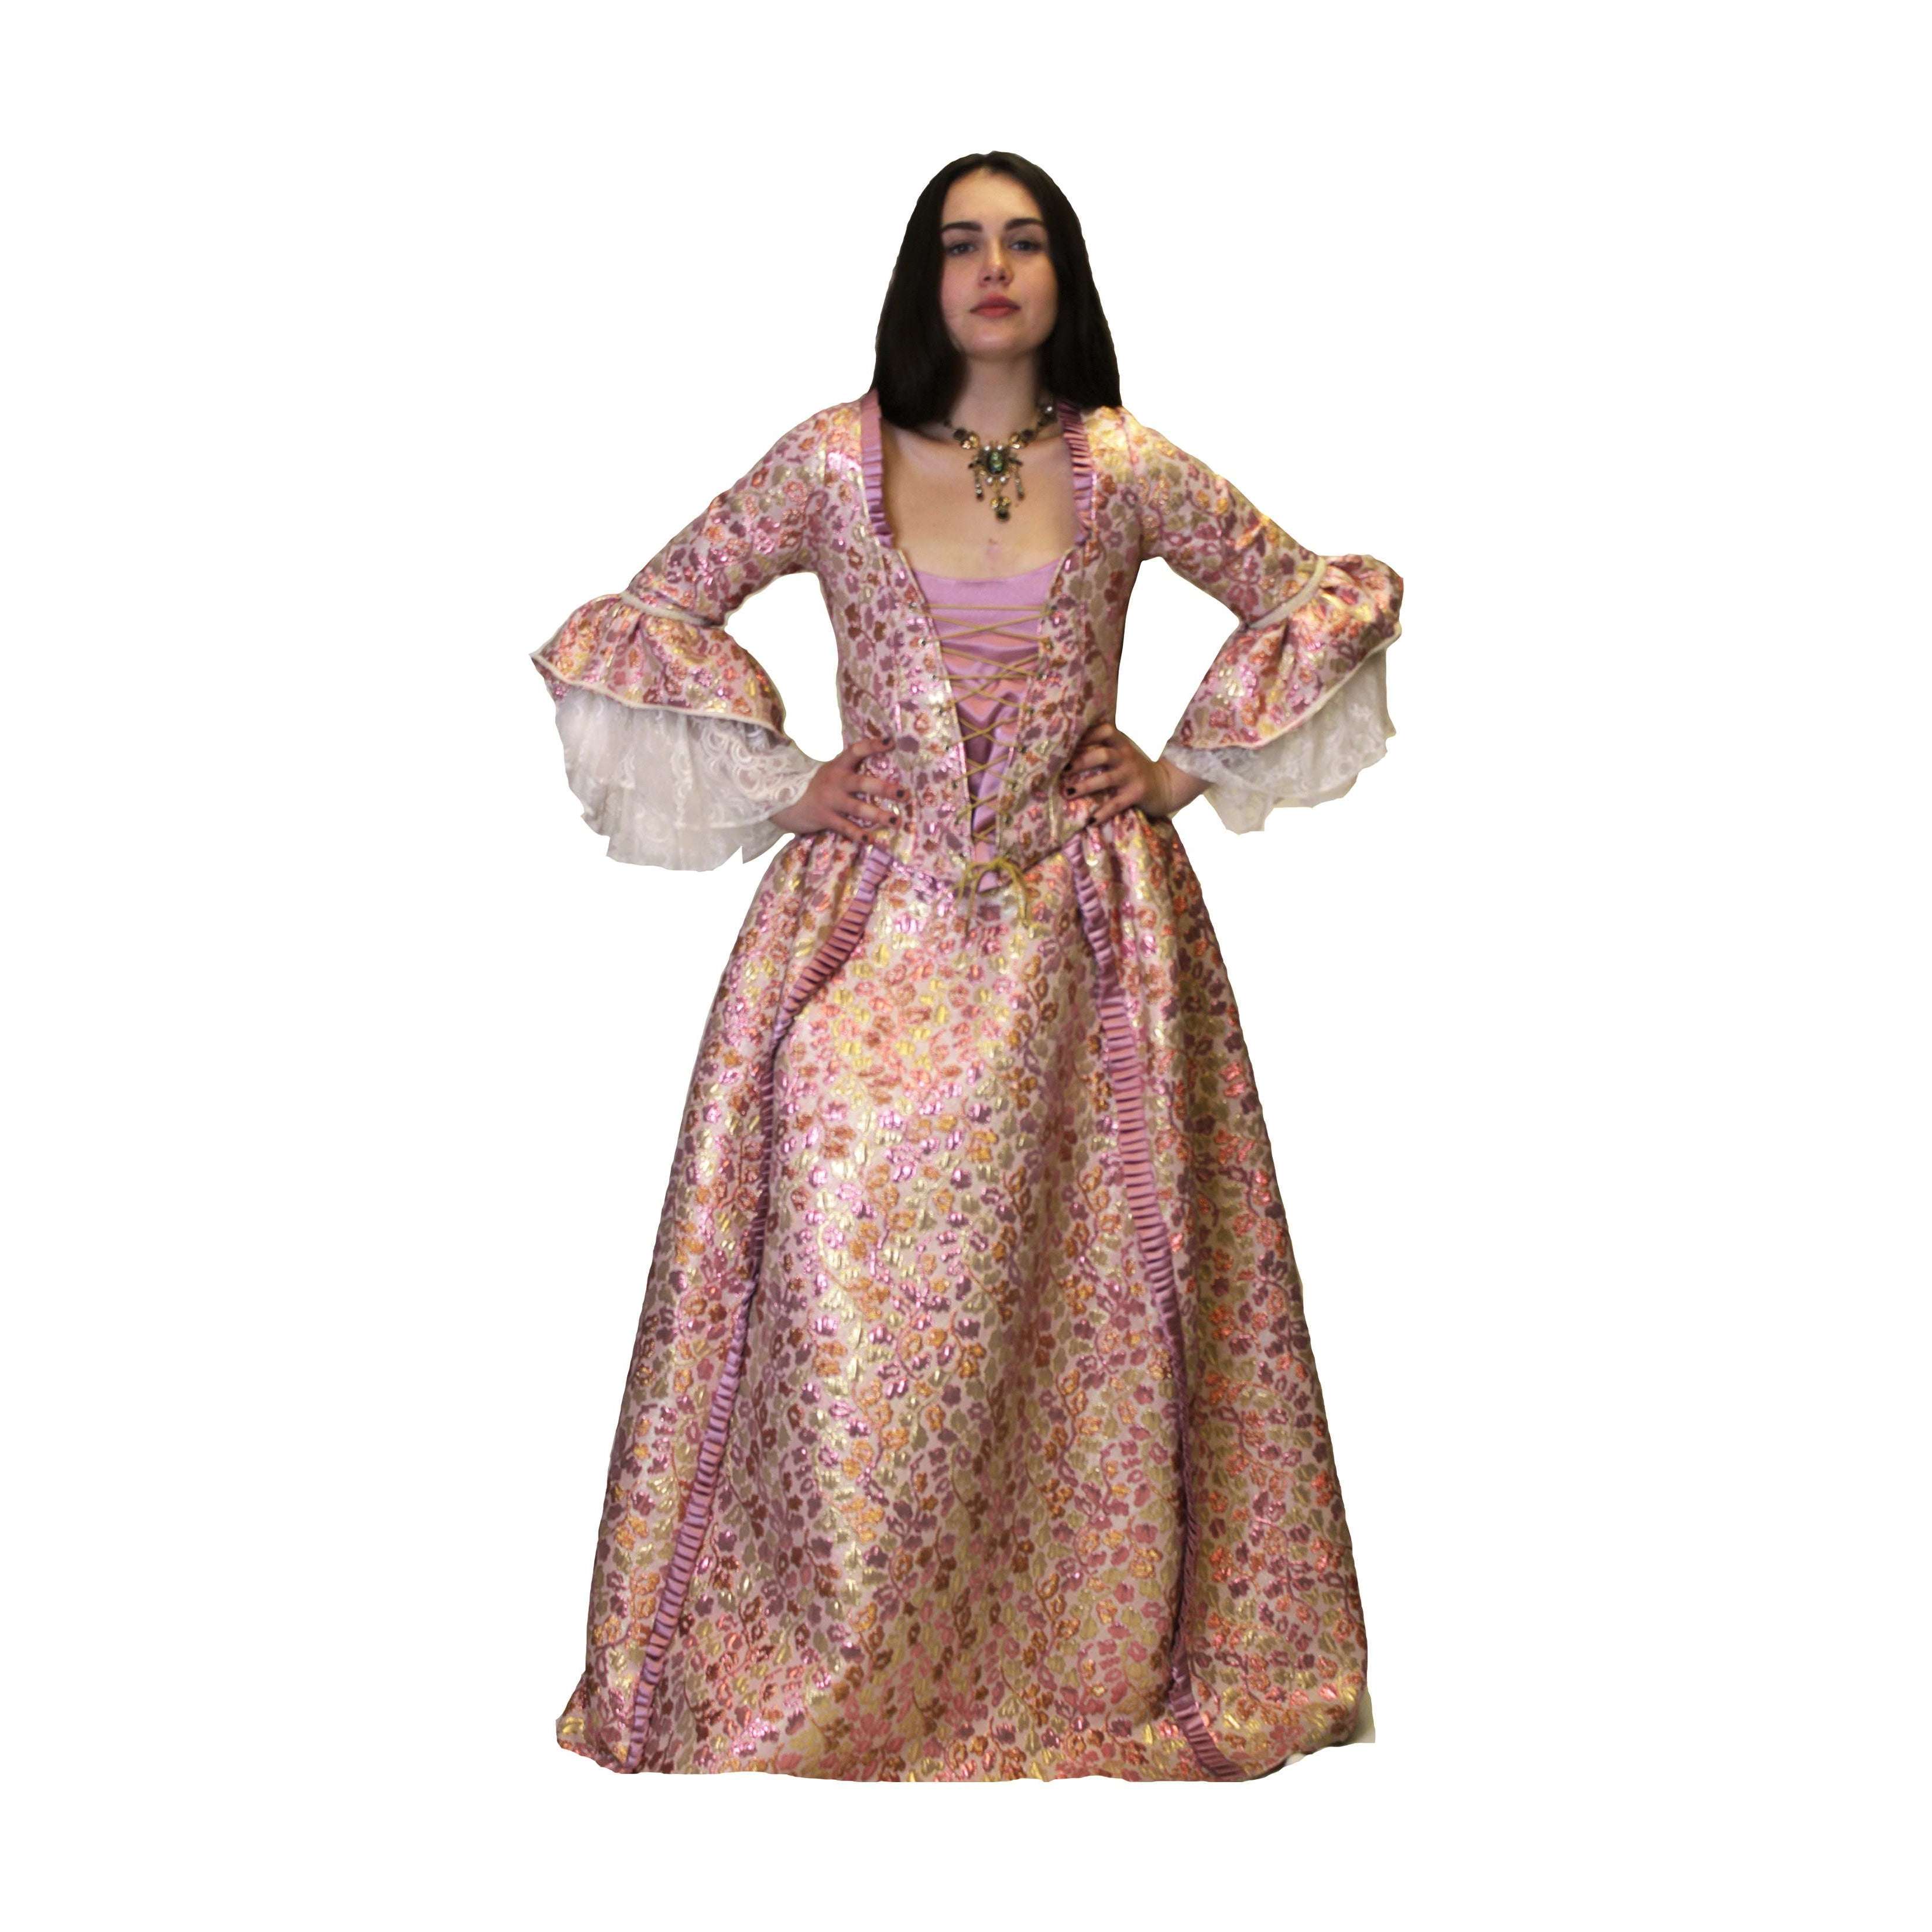 Colonial Stunning Rose Gold & Pink Dress Women's Adult Costume